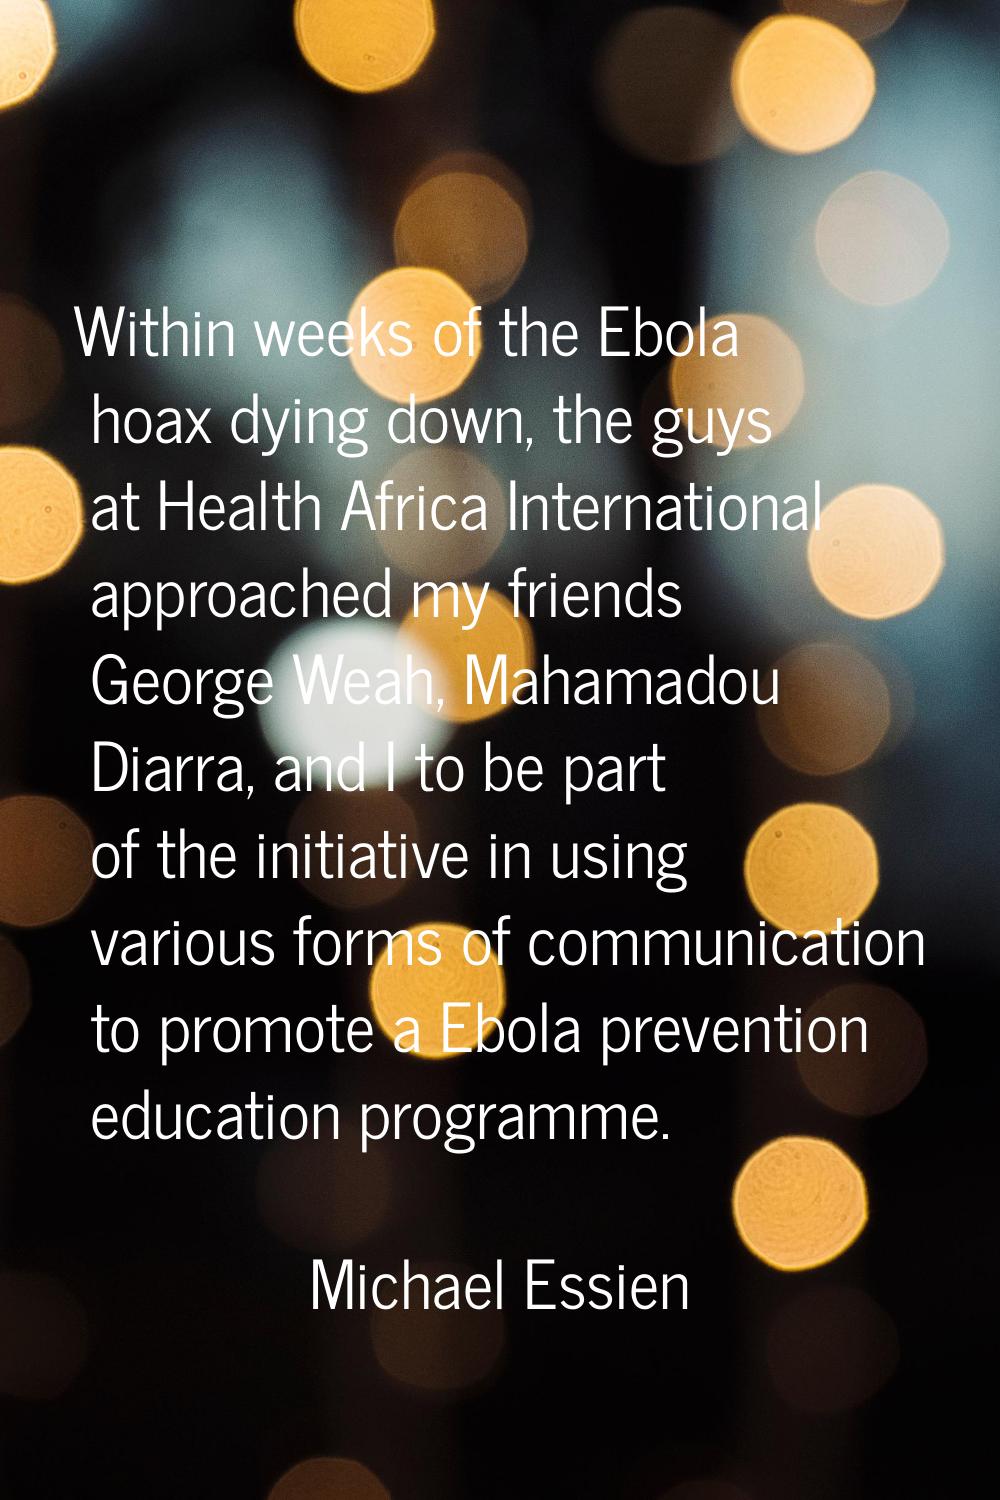 Within weeks of the Ebola hoax dying down, the guys at Health Africa International approached my fr